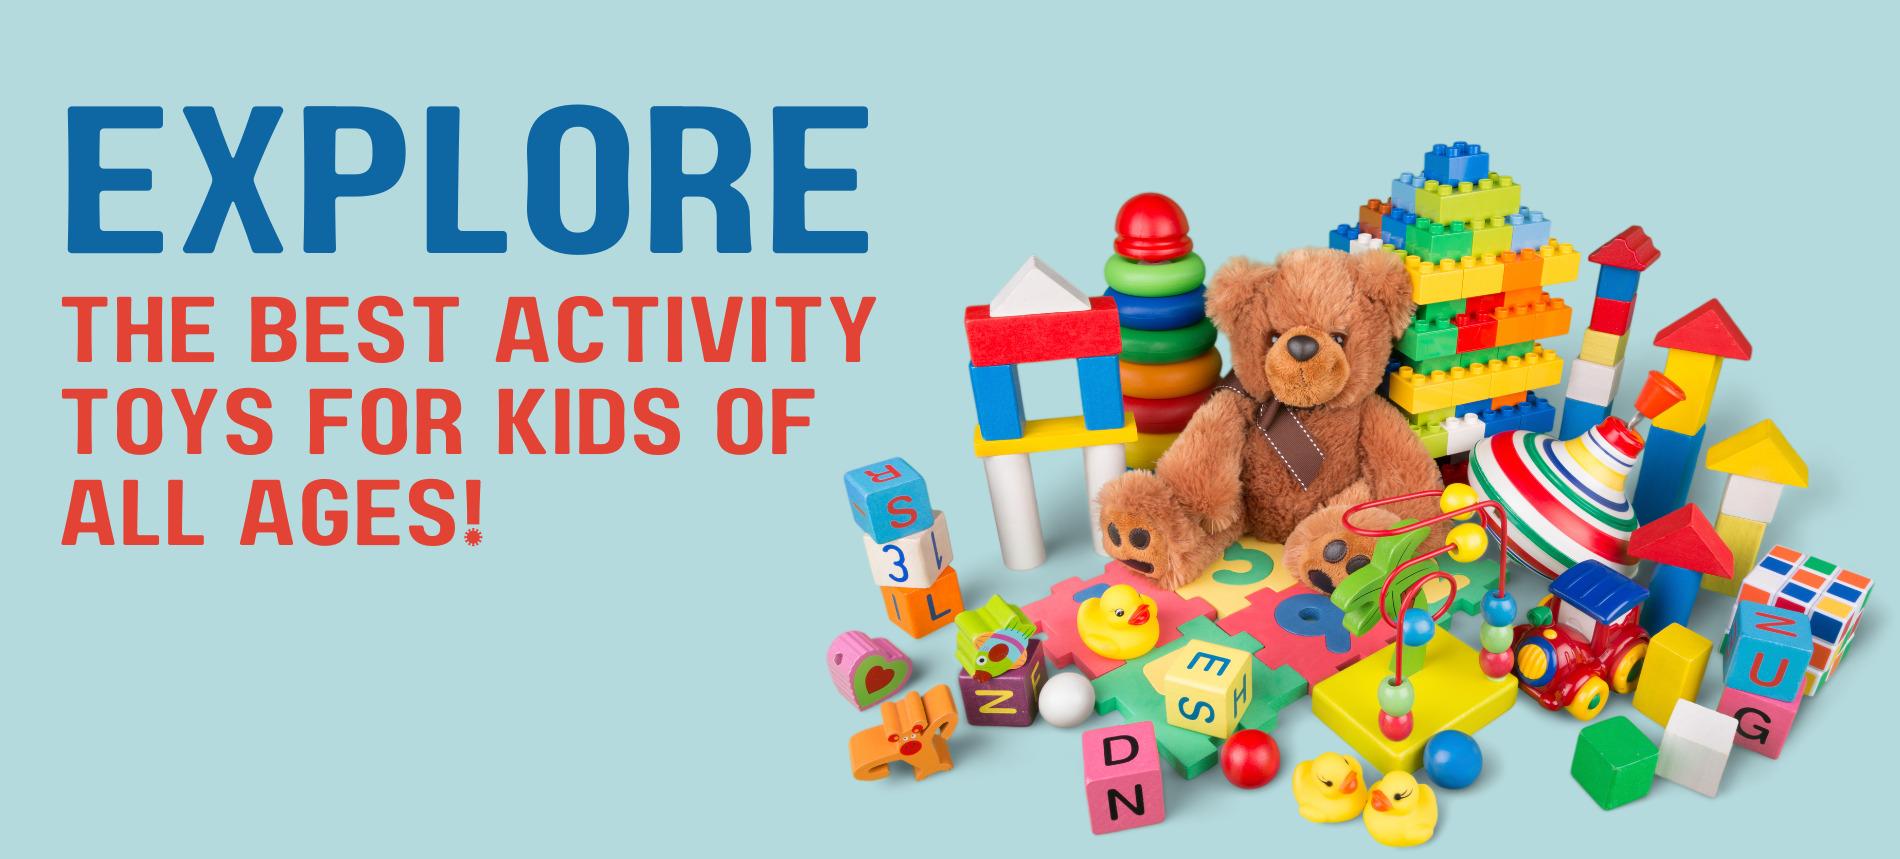 activity%20toys%202.png?1696523911685